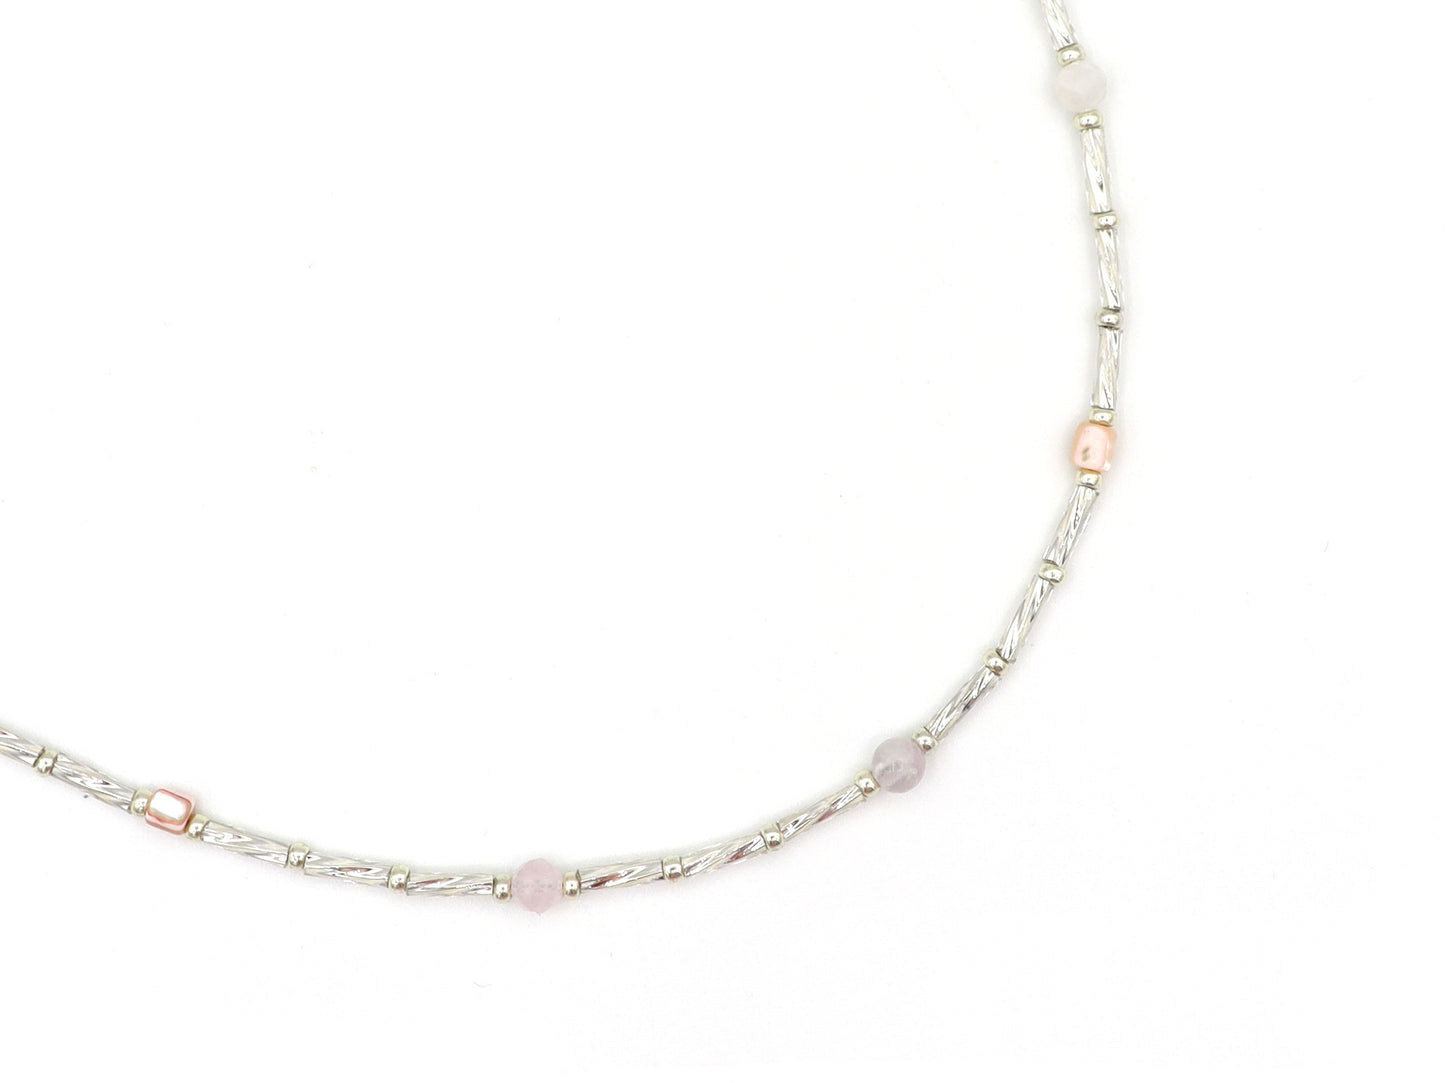 Necklace Fira morganite and amethyst, silver or gold stainless steel